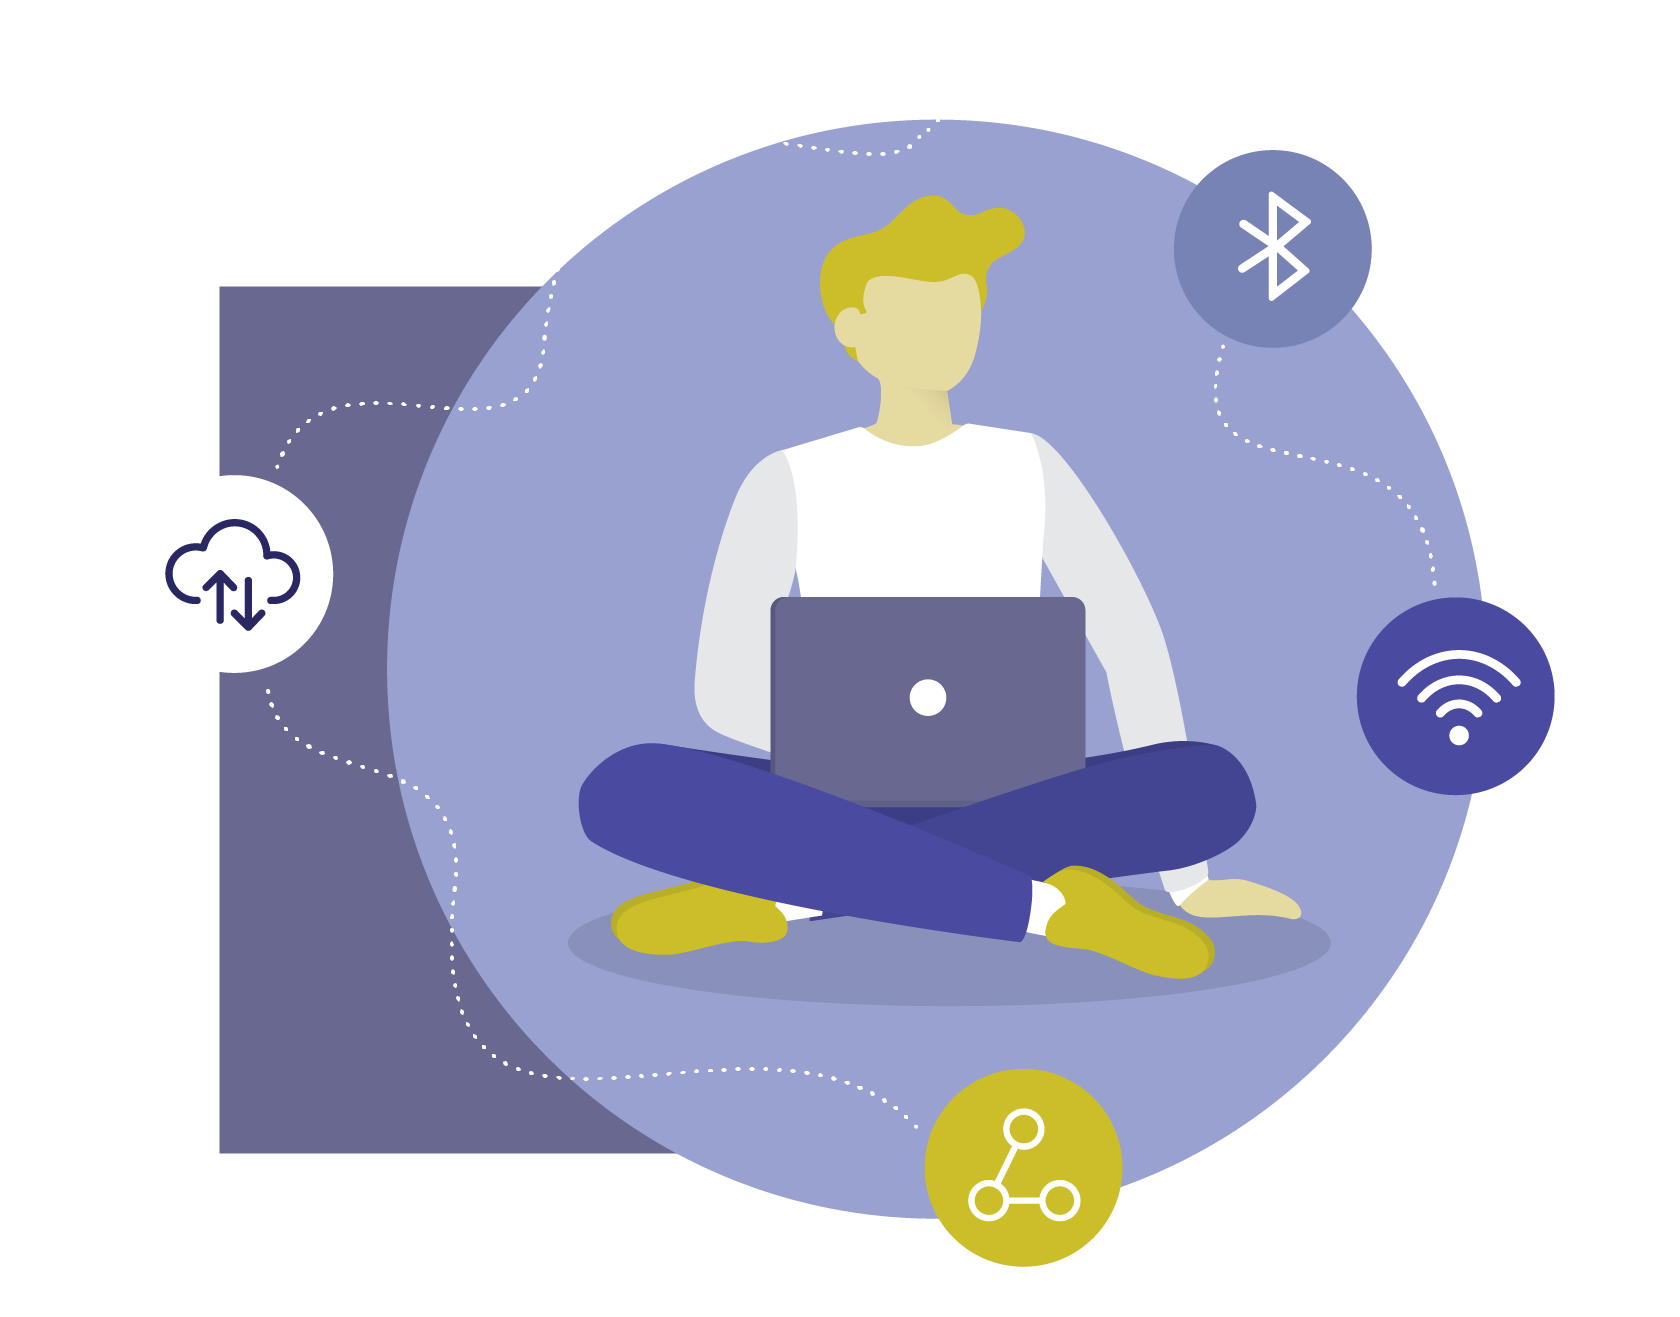 An illustration depicting a person using their laptop away from their desk, supported by business grade connectivity services.